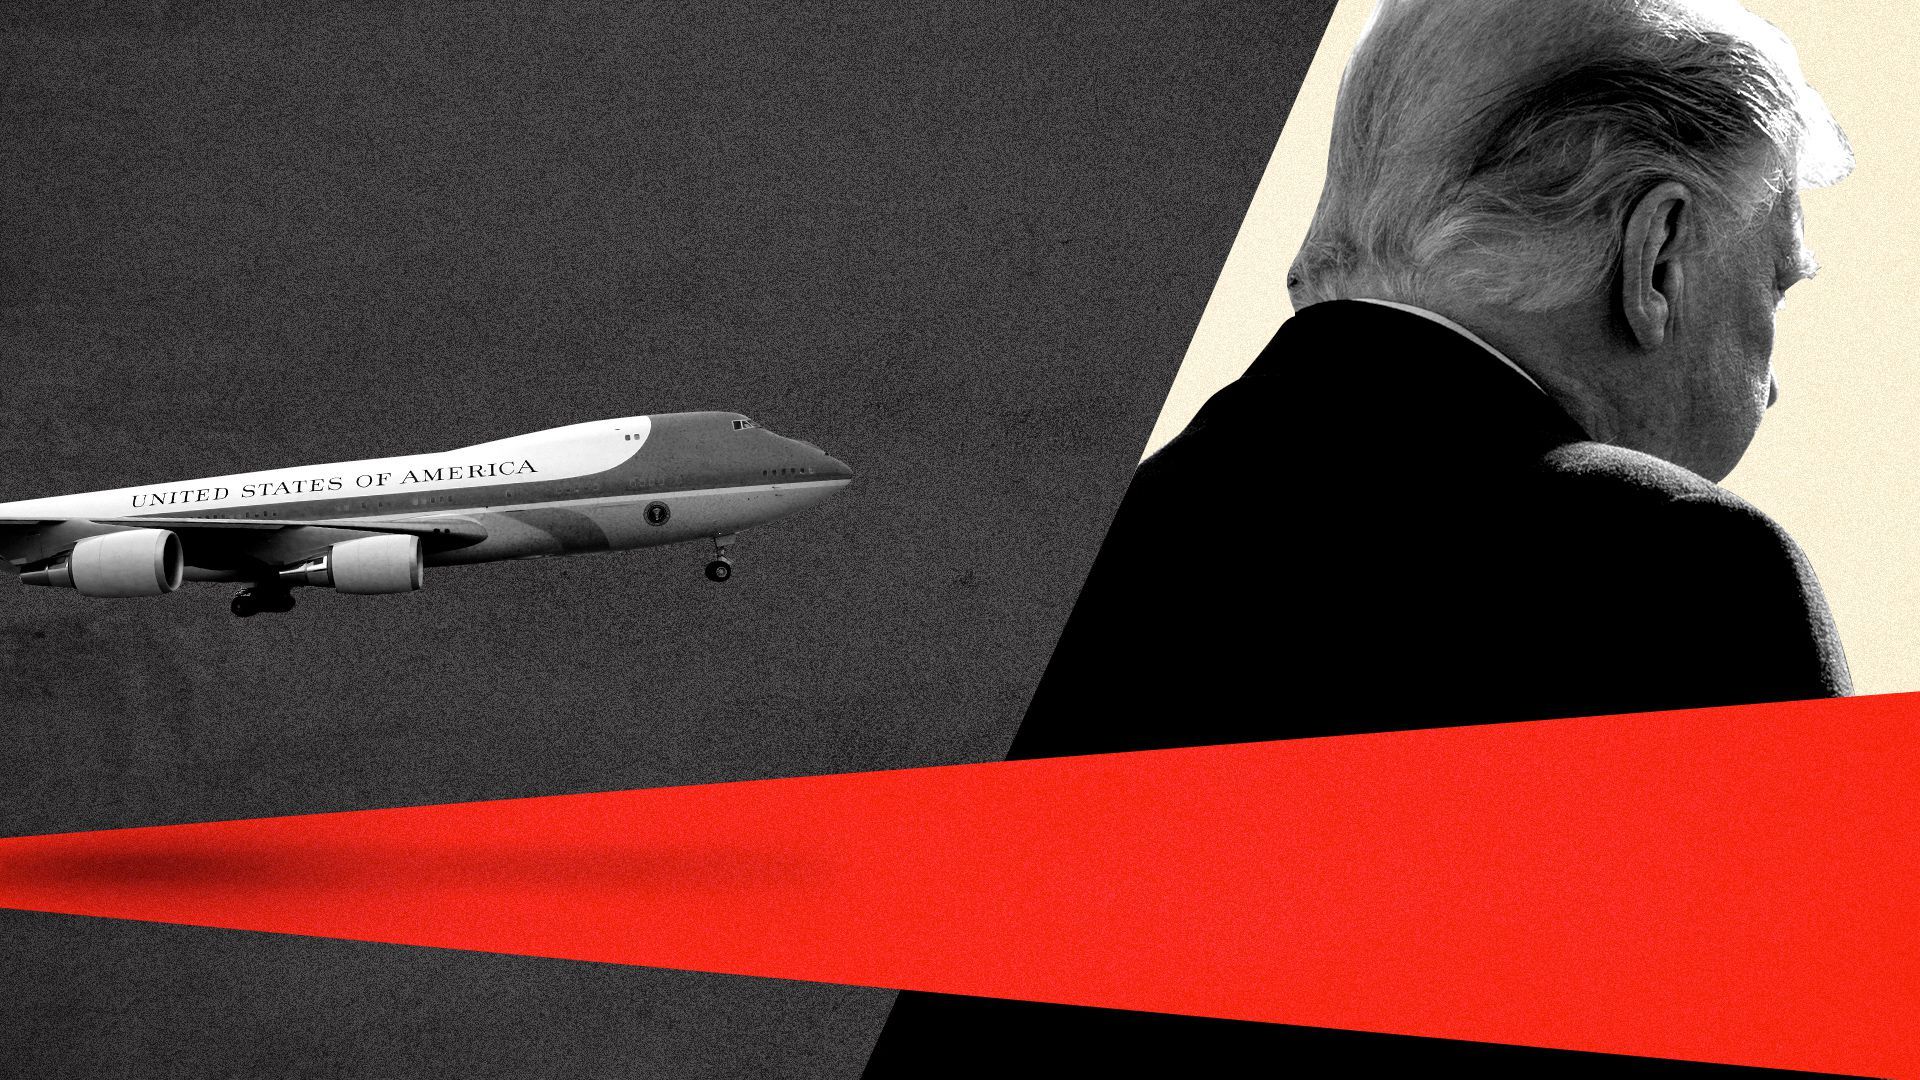 Photo illustration of a plane landing and Donald Trump with his back turned.